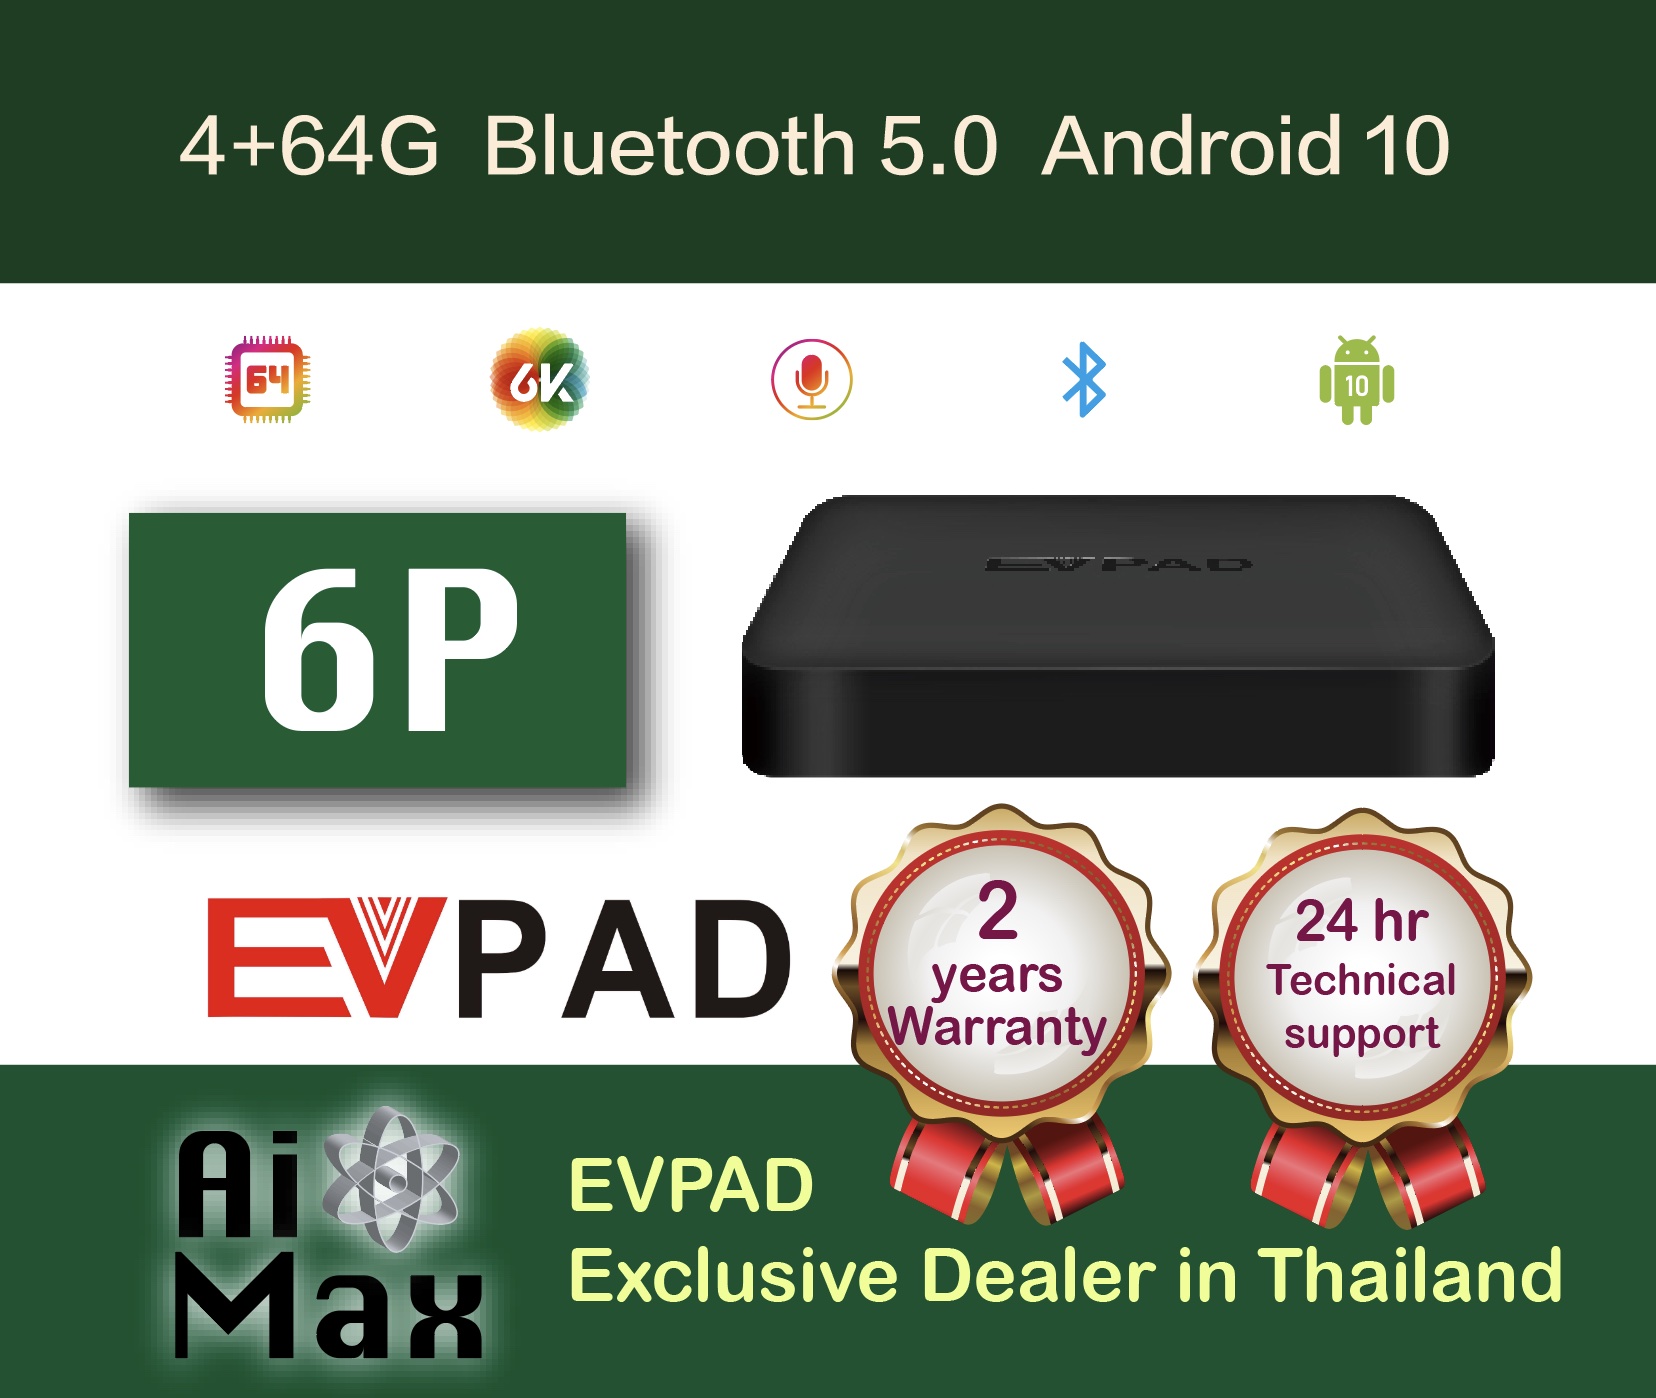 EVPAD 易播 2021最新款 6P TV box 4G + 64G BT 5.0 New Model Android 10 Chinese Korean Japanese Taiwan Hong Kong Singapore Malaysia Indonesia Vietnam USA Canada British 4K IPTV Real time TV channel / Unblock